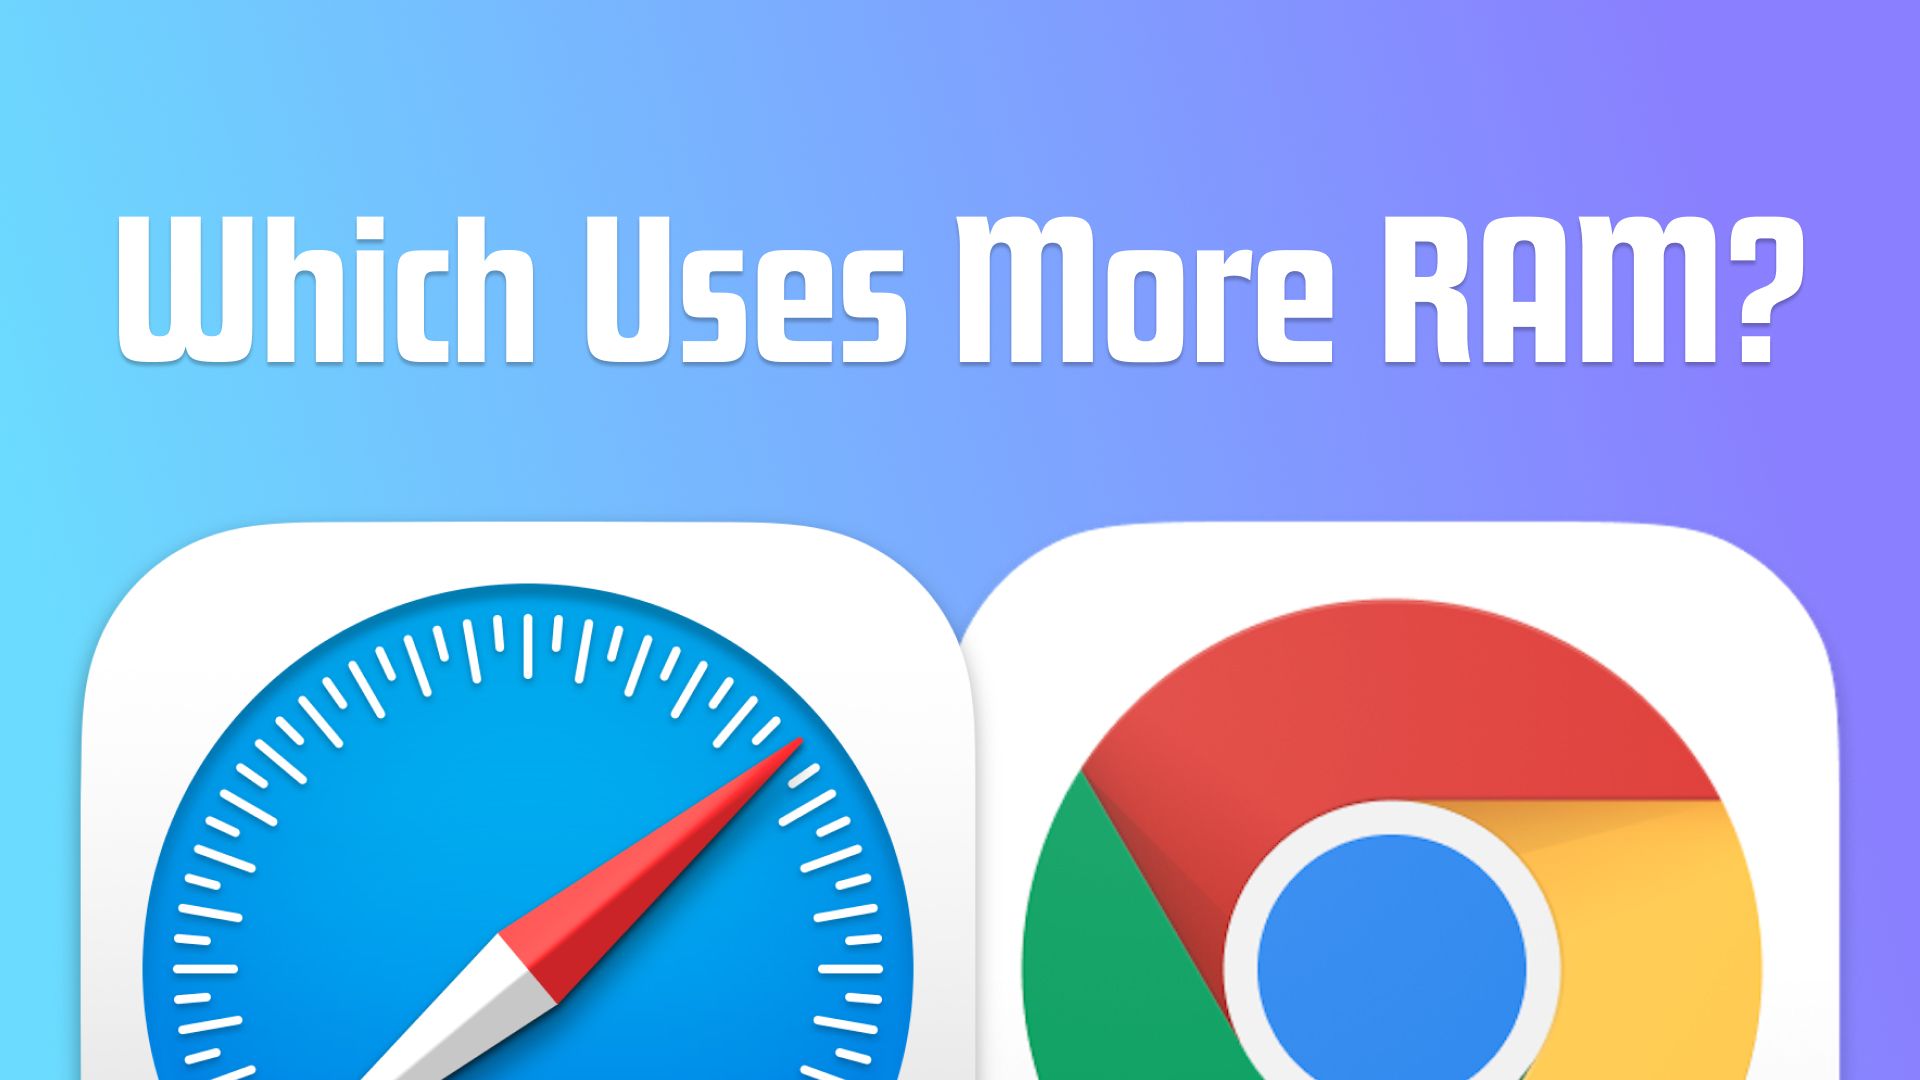 Yes, Chrome Uses More RAM than Safari, but How Much More?